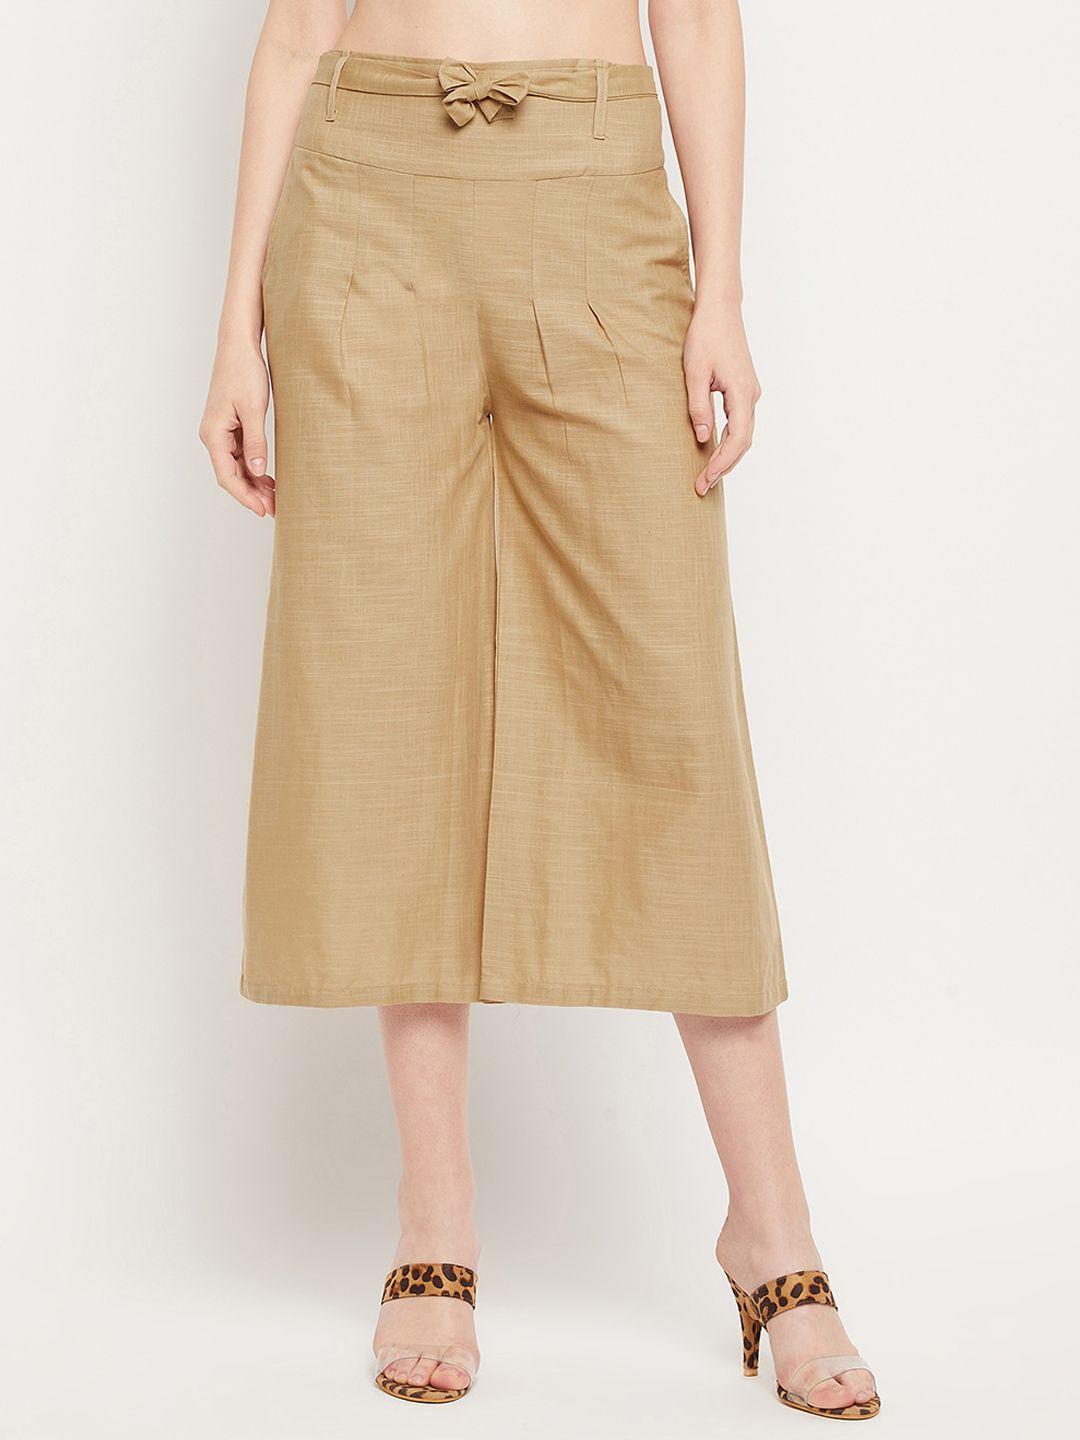 clora creation women smart pleated culottes trousers